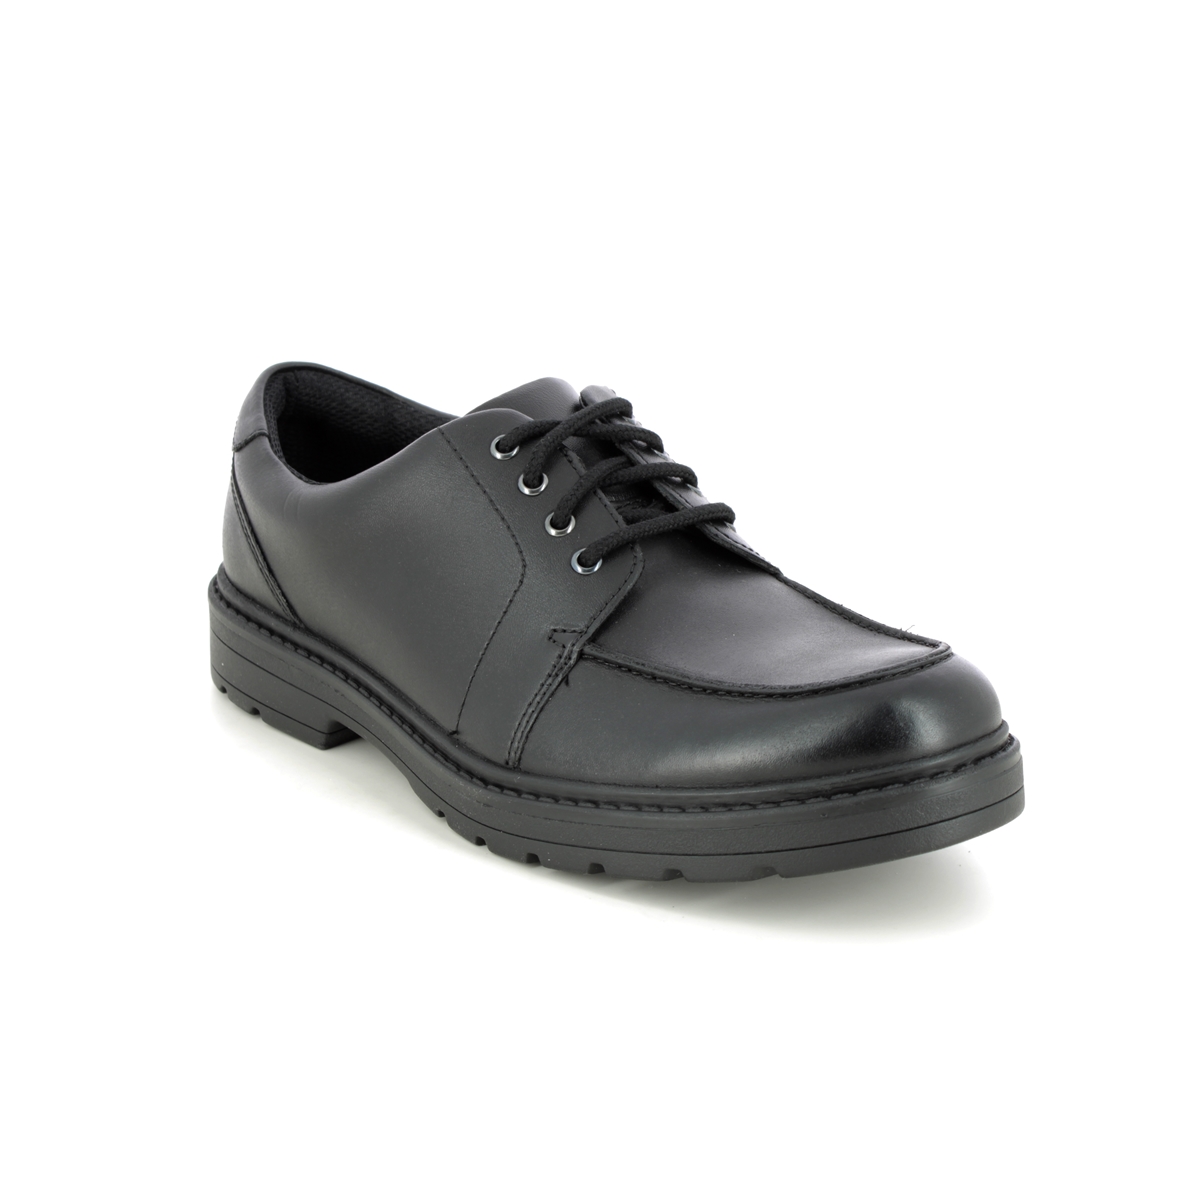 Clarks Loxham Pace Y Black Kids Boys Shoes 515926F In Size 5 In Plain Black F Width Fitting Regular Fit For School For kids